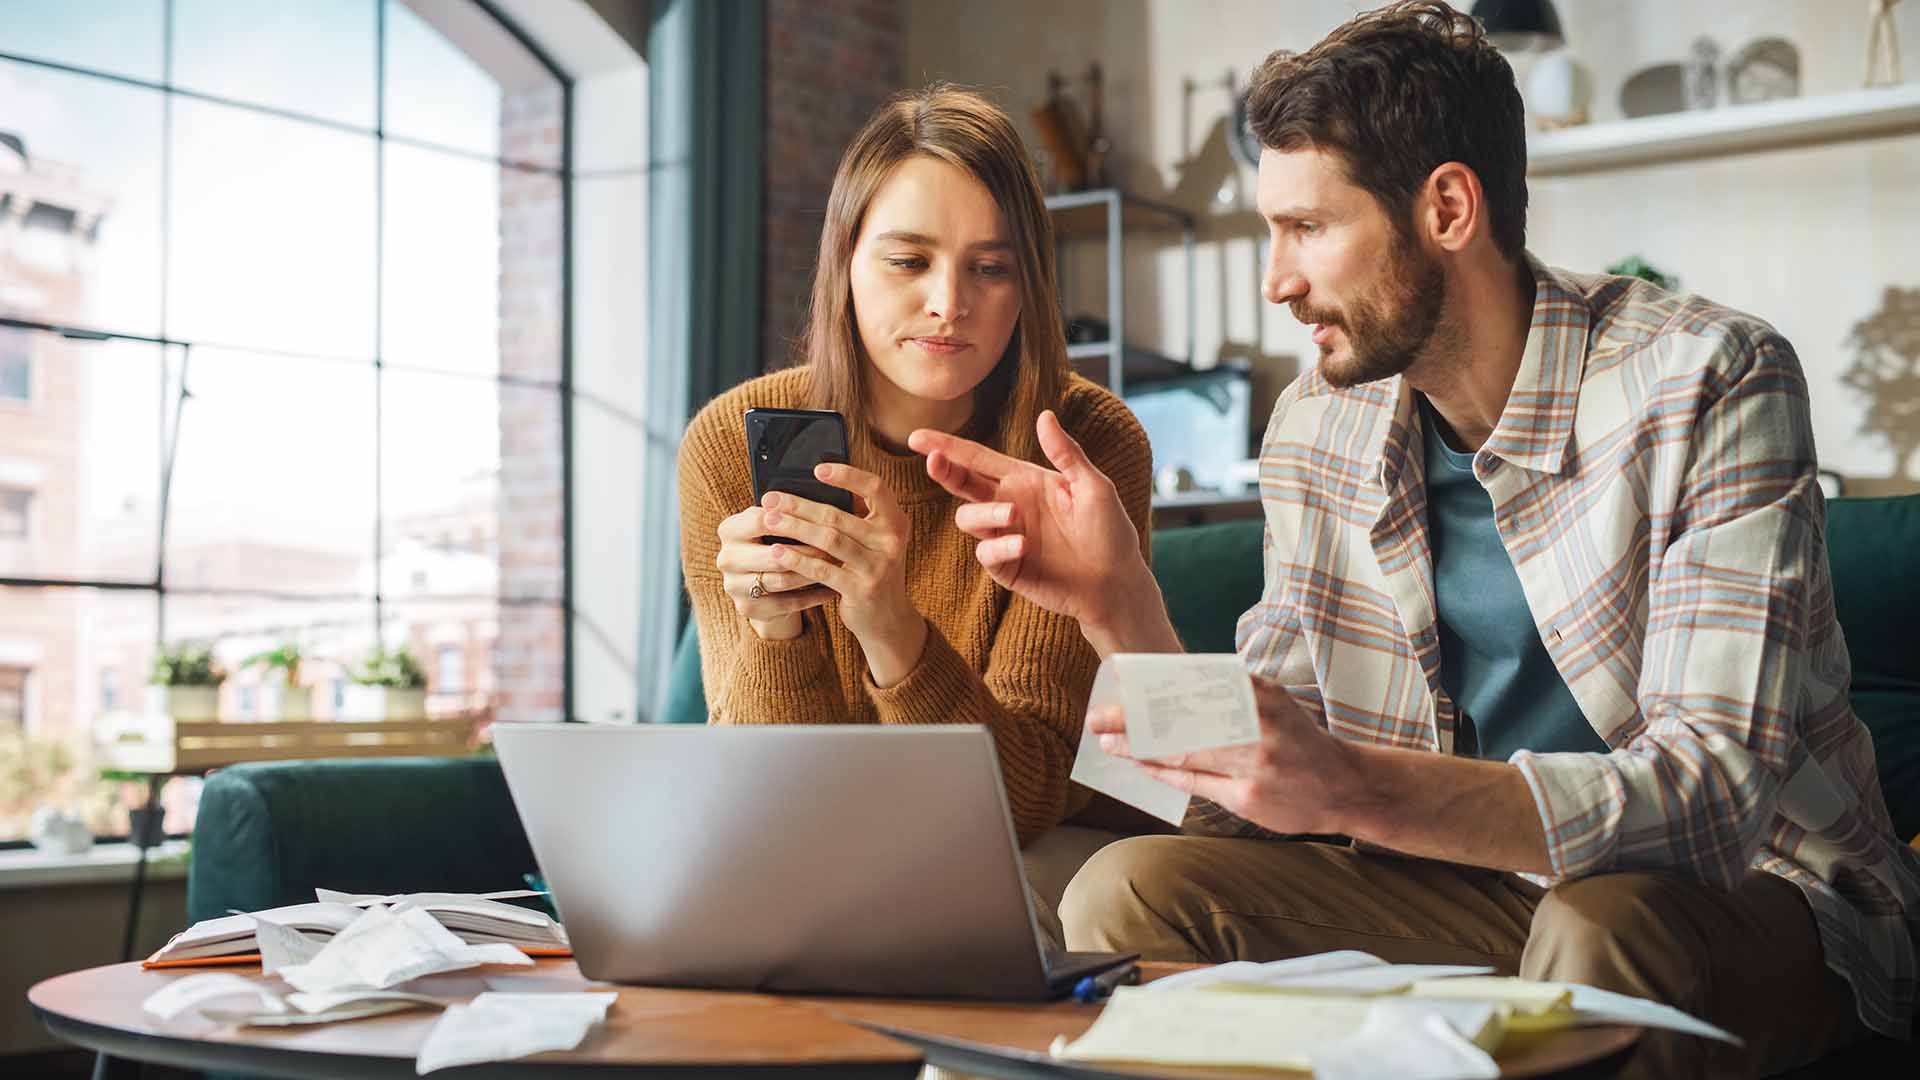 Couple reviewing finances together with receipts, laptop and cell phone at home